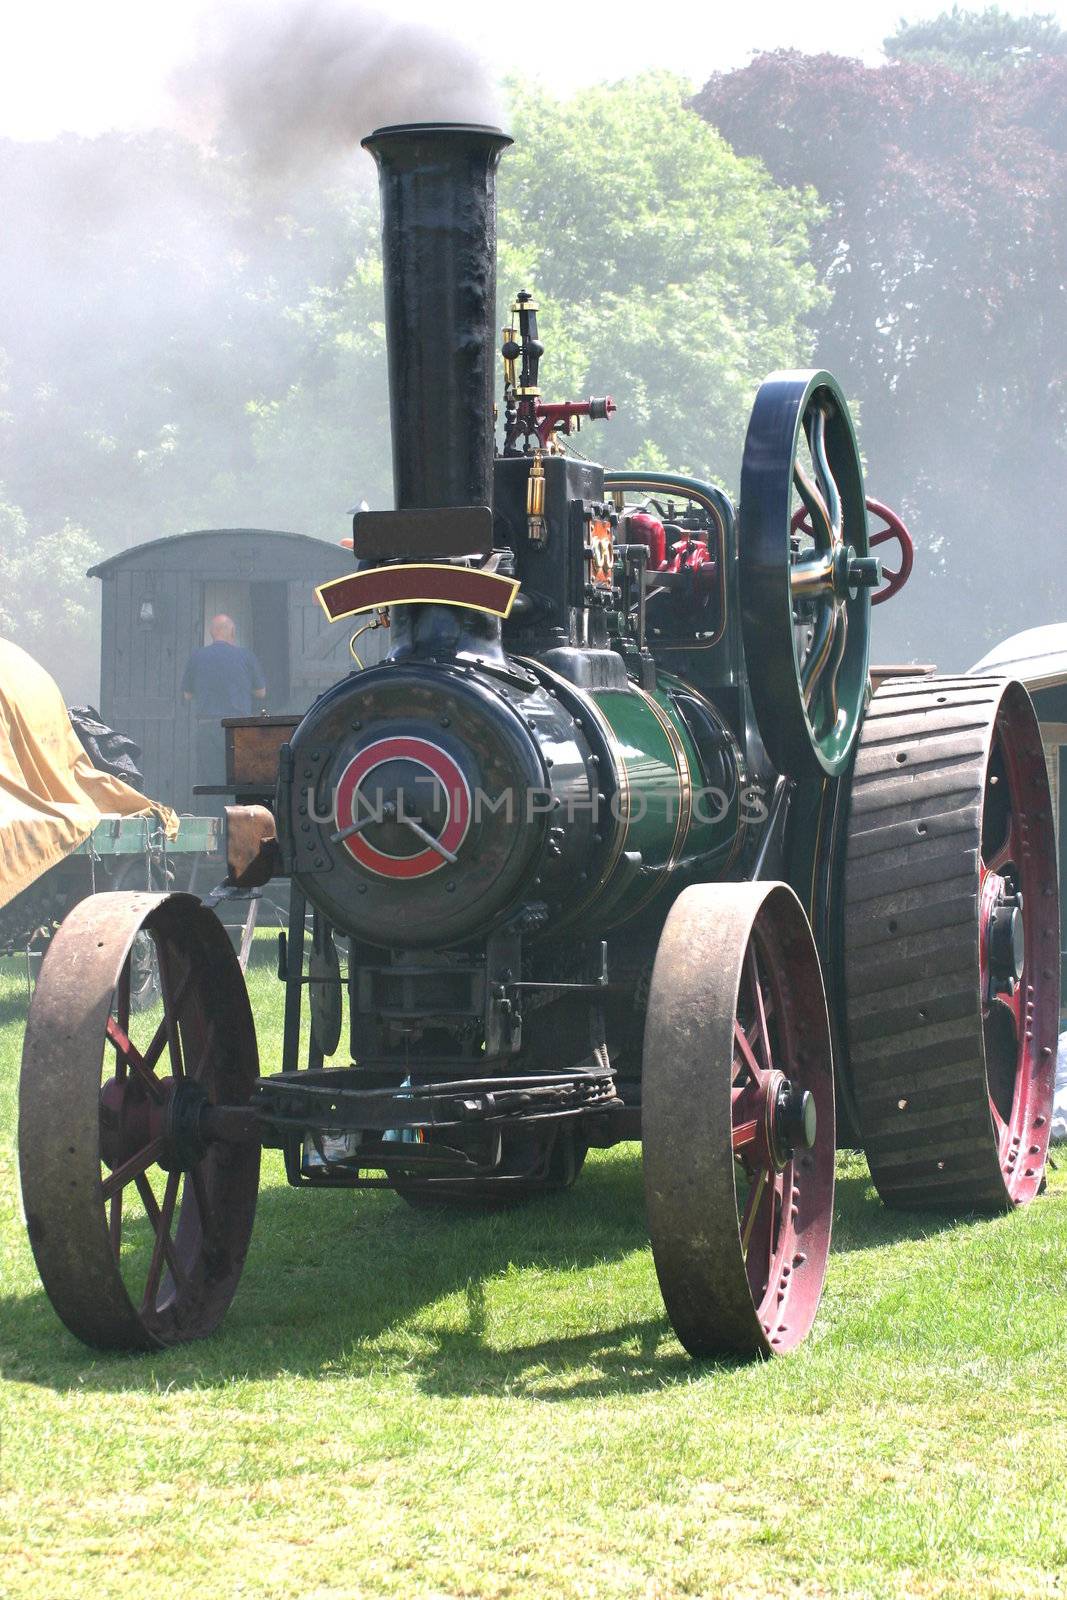 green traction stream engine at a steam rally